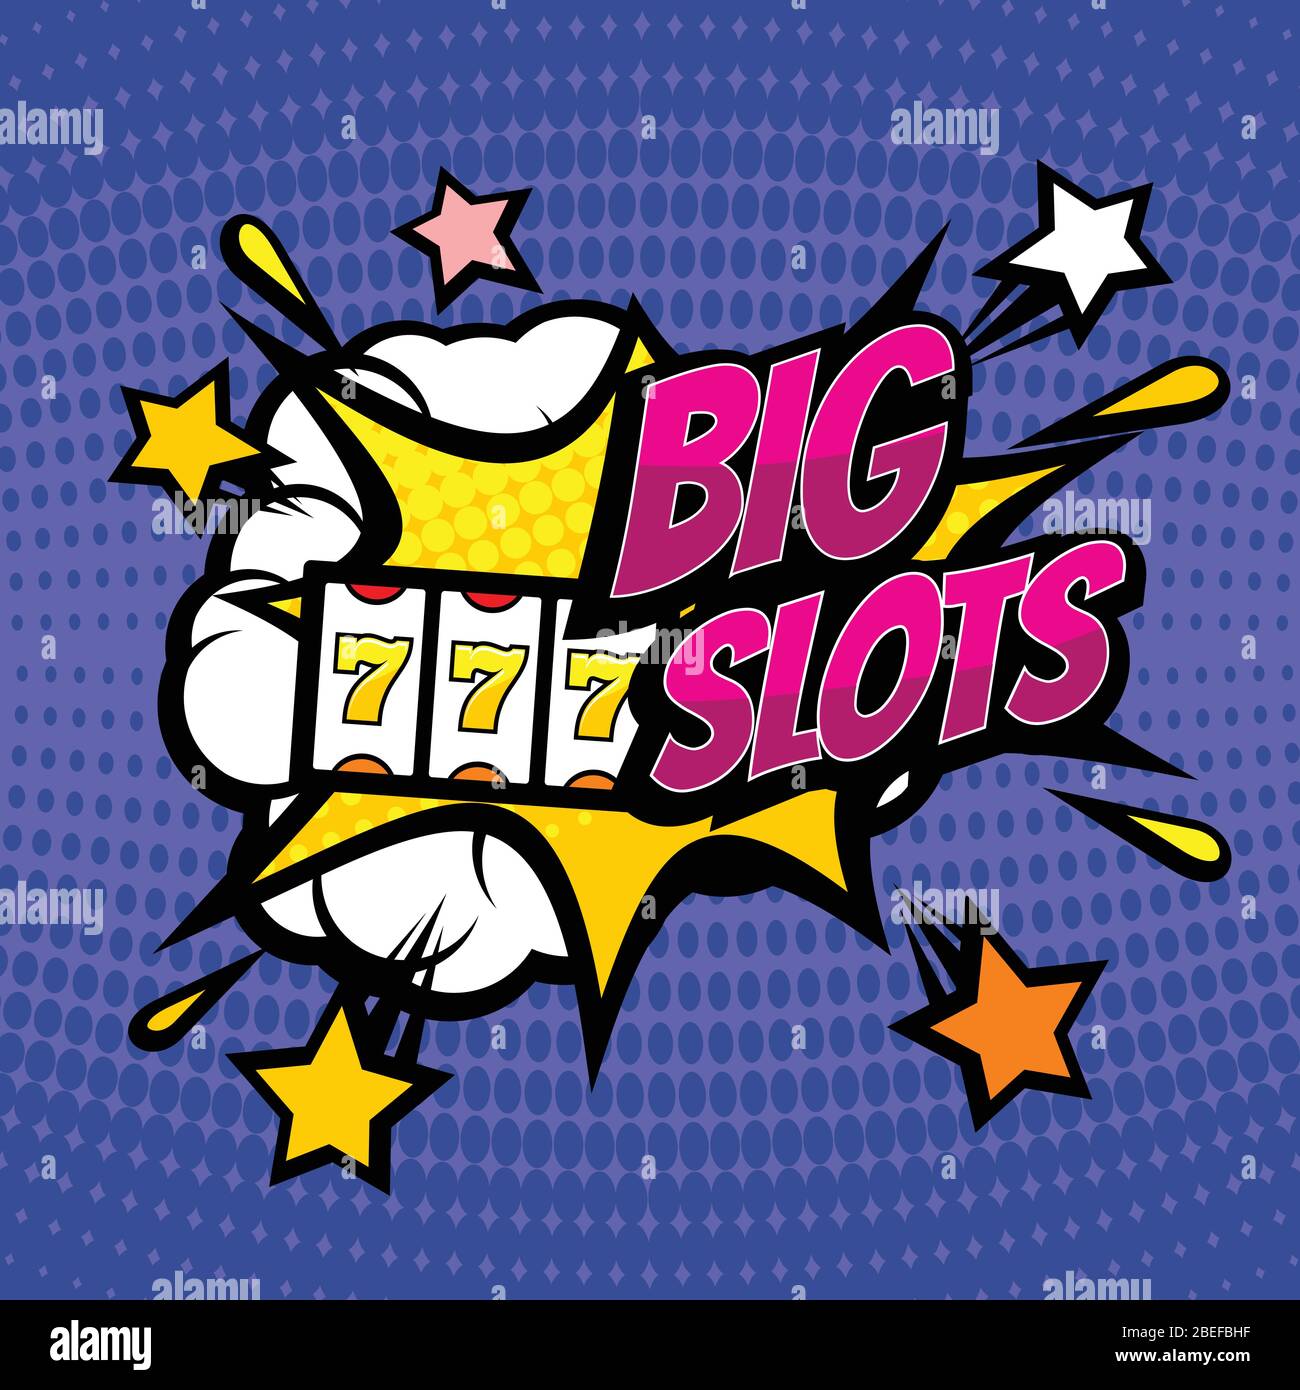 BIG SLOTS retro casino gambling vector background in pop art comic style. Gambling game in casino, jackpot and explosion fortune illustration Stock Vector